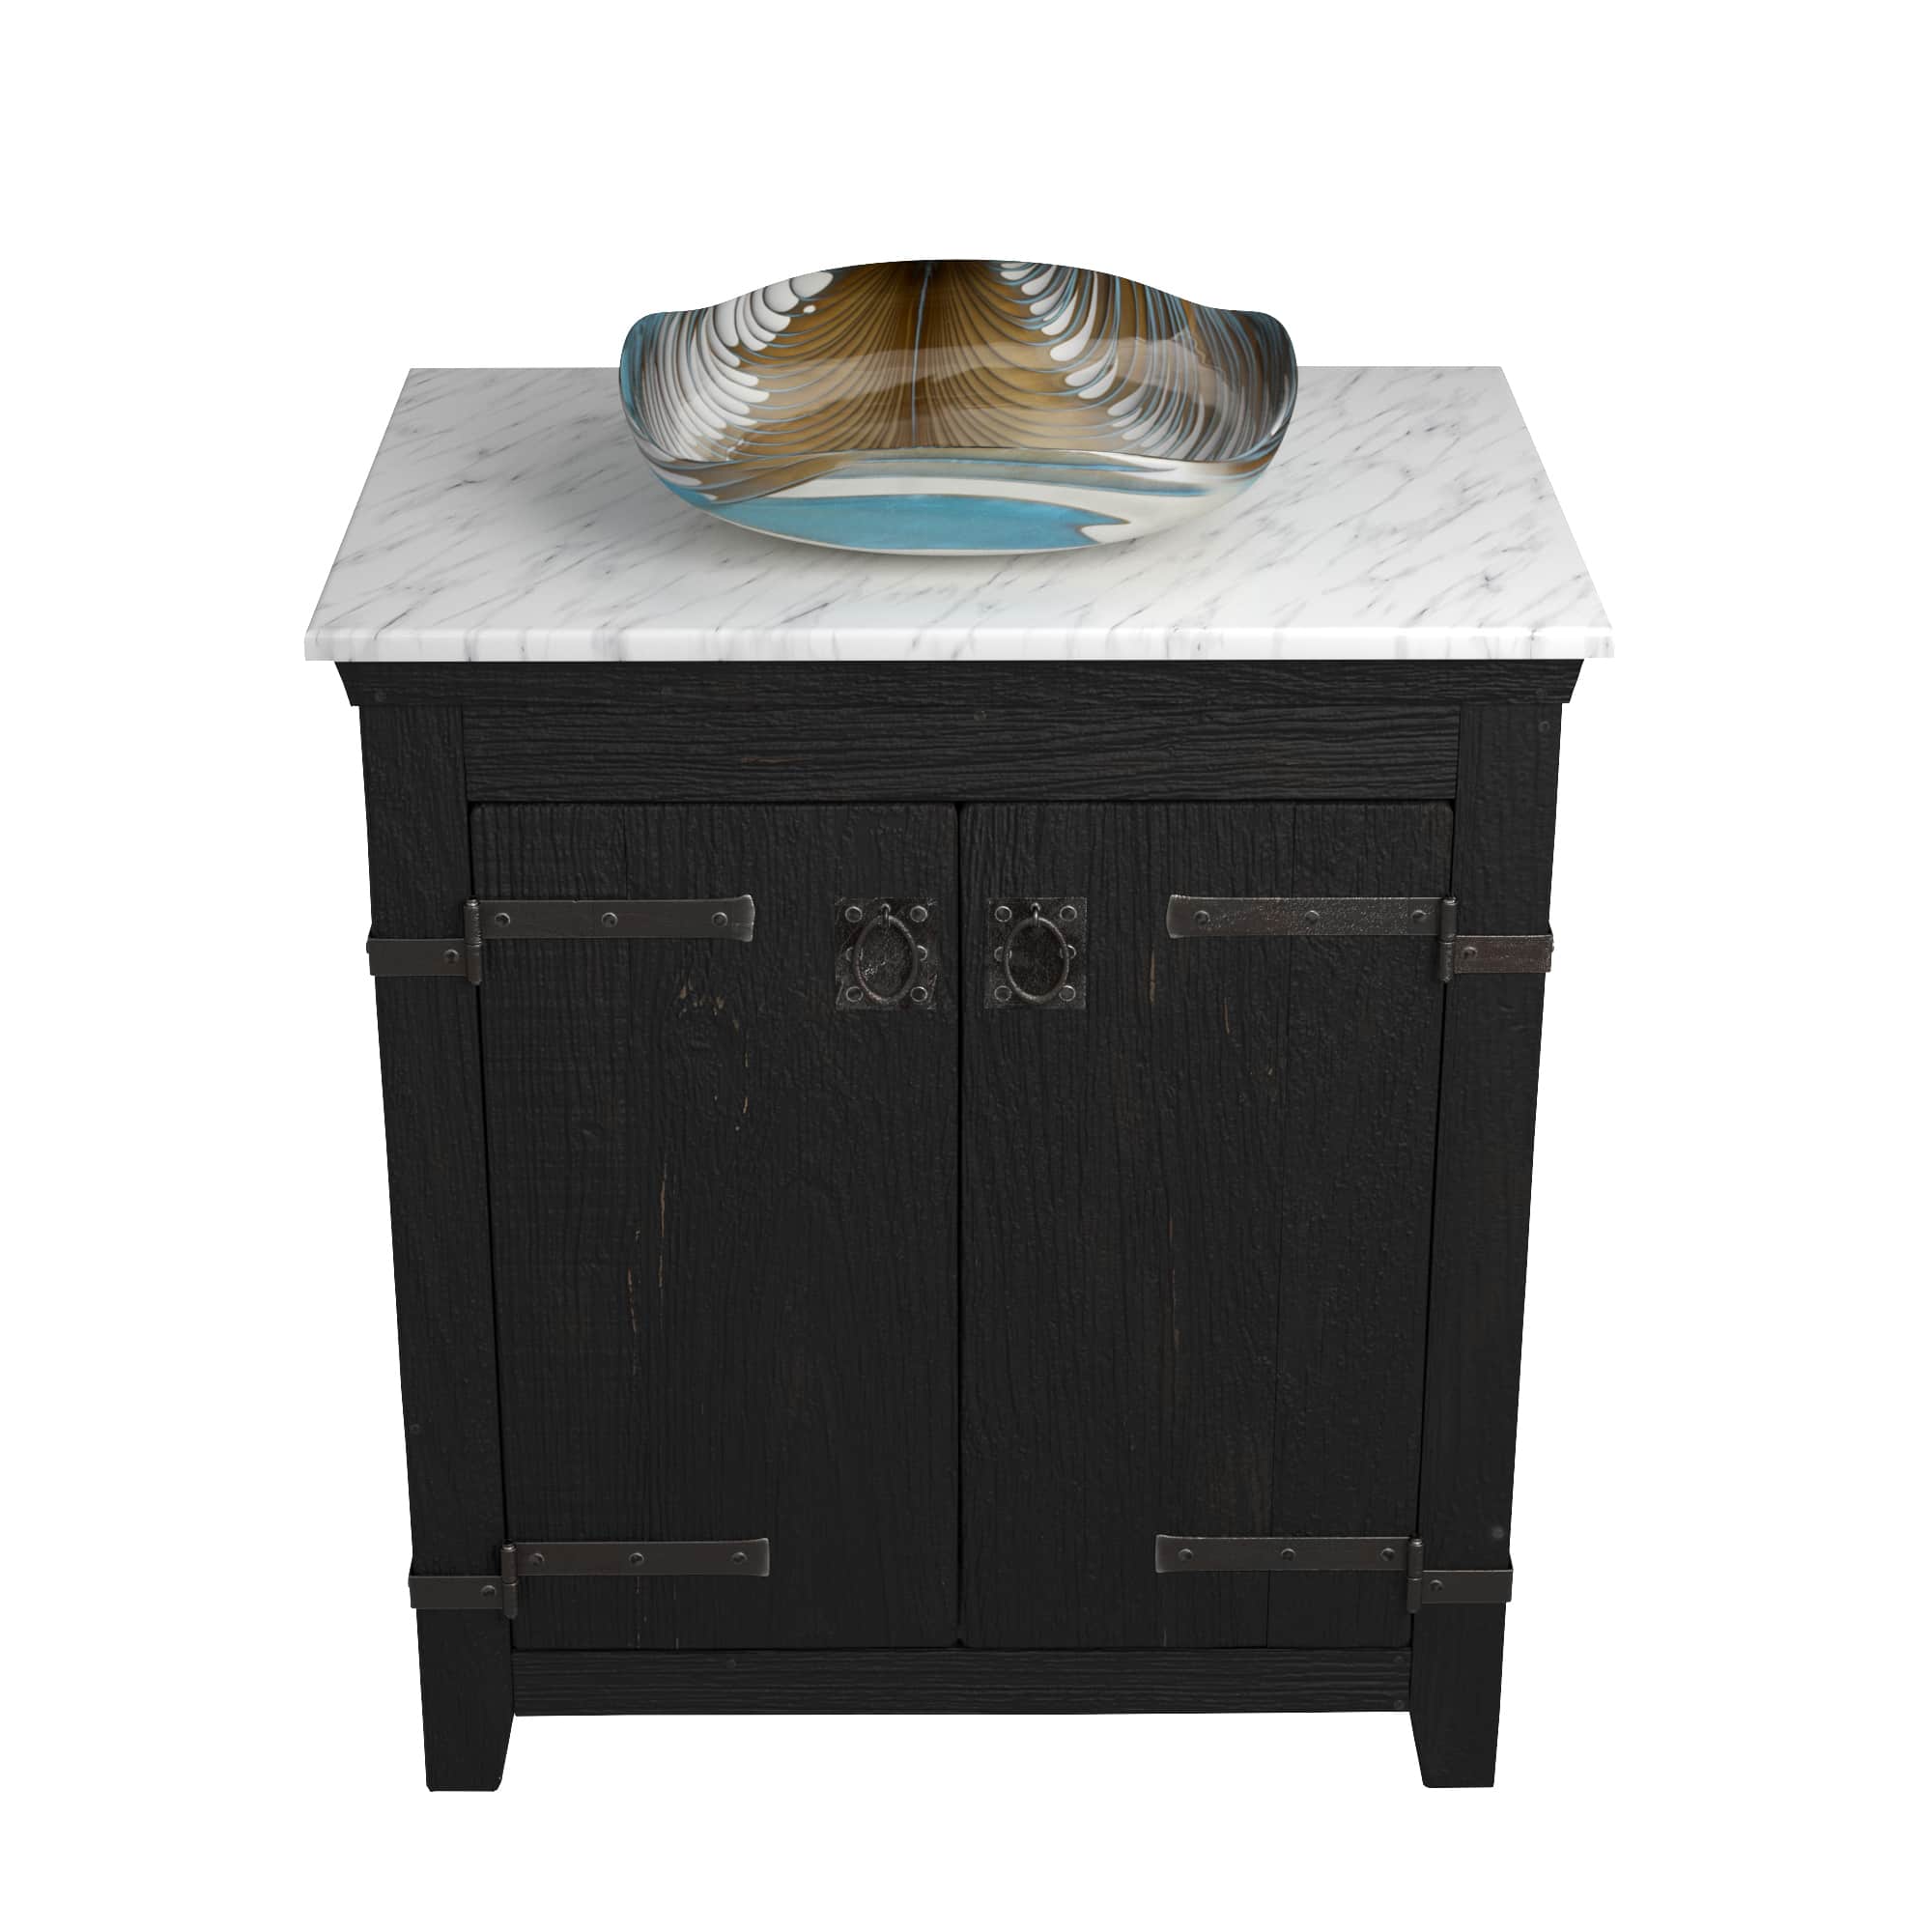 Native Trails 30" Americana Vanity in Anvil with Carrara Marble Top and Lido in Shoreline, Single Faucet Hole, BND30-VB-CT-MG-029